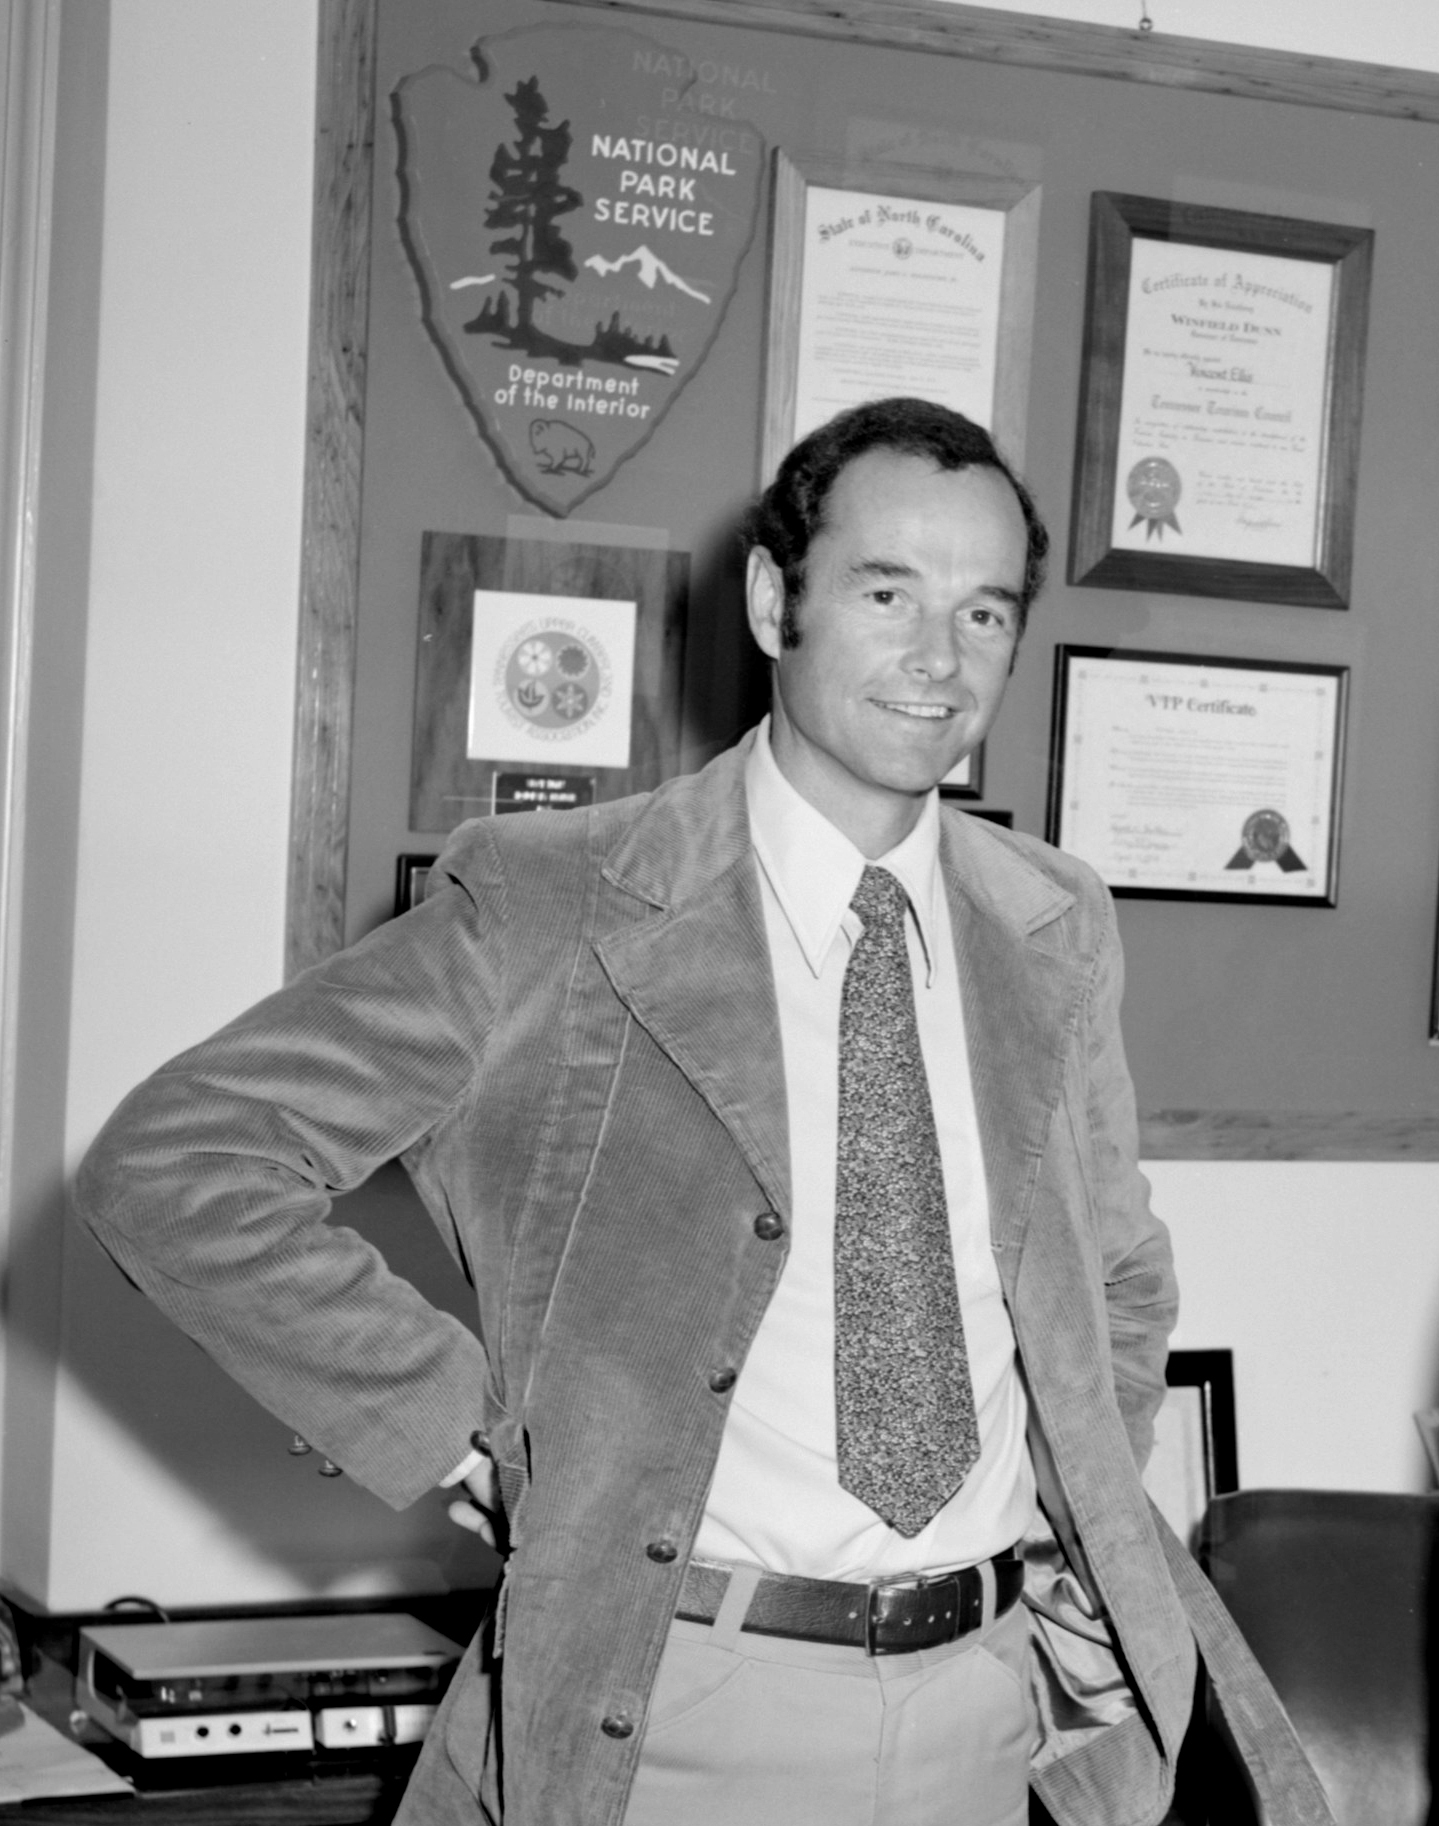 Smiling White man in corduroy jacket and wide tie stands in front of a bulletin board with awards and NPS arrowhead.